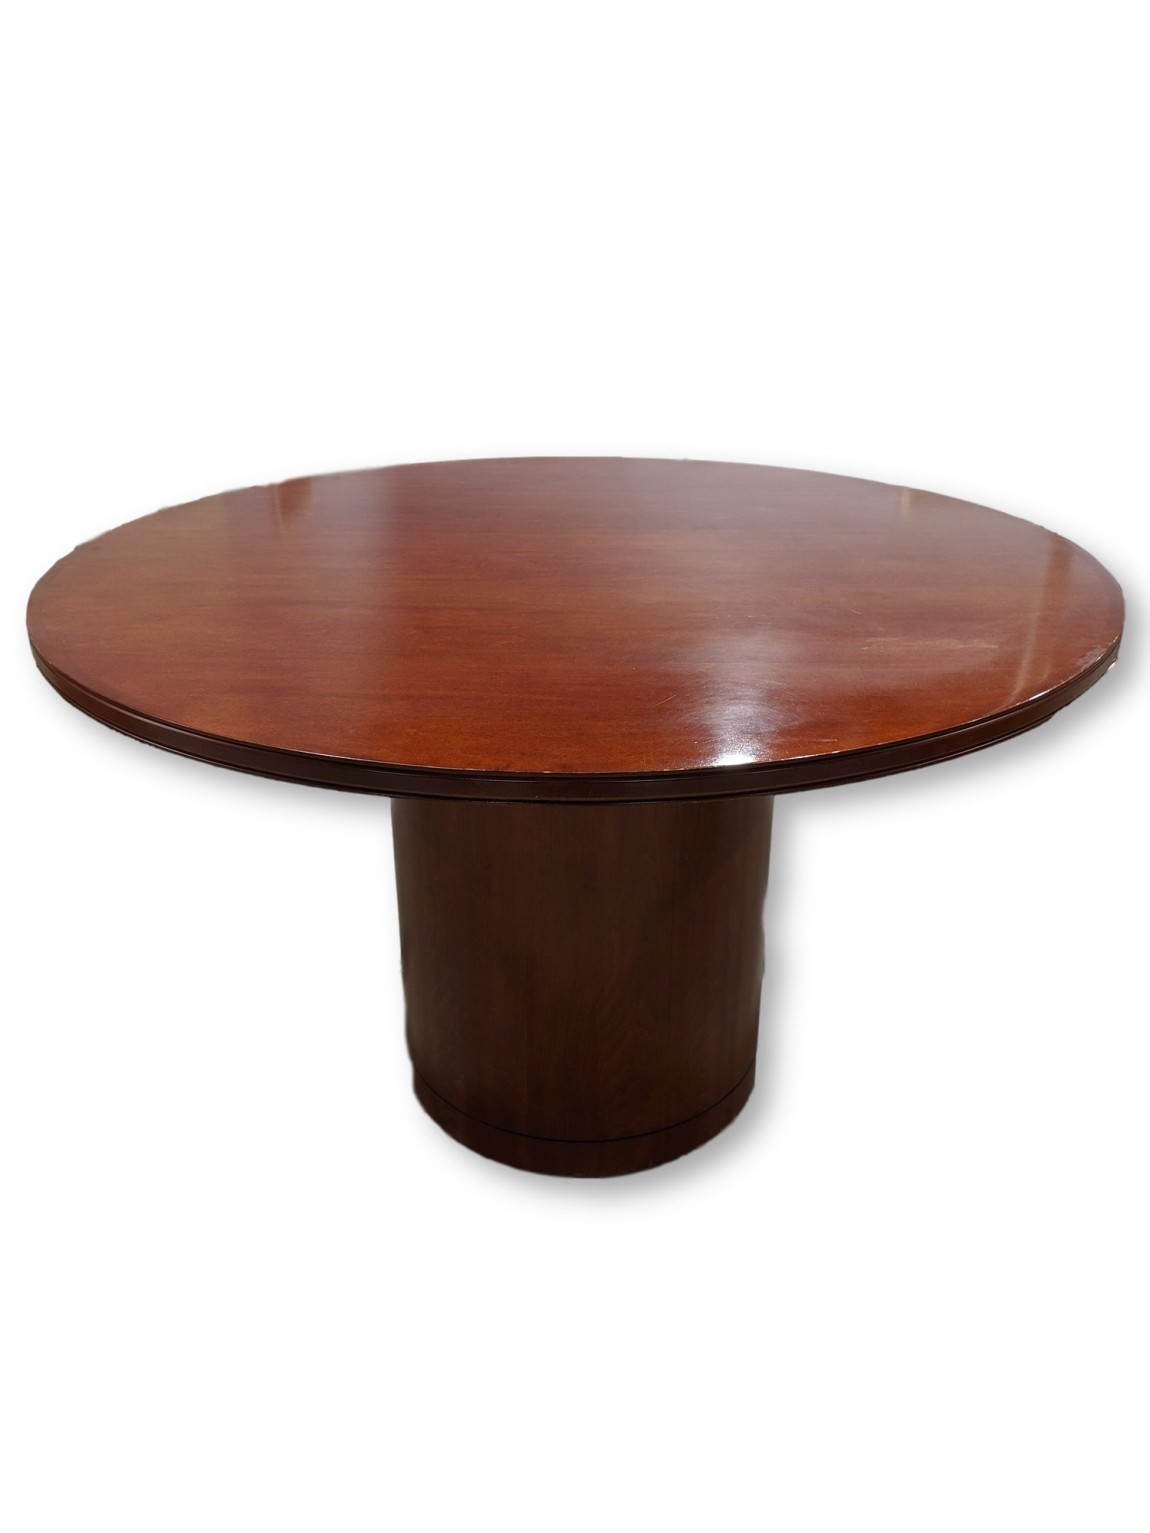 48” Round Solid Wood Cherry Conference Meeting Table